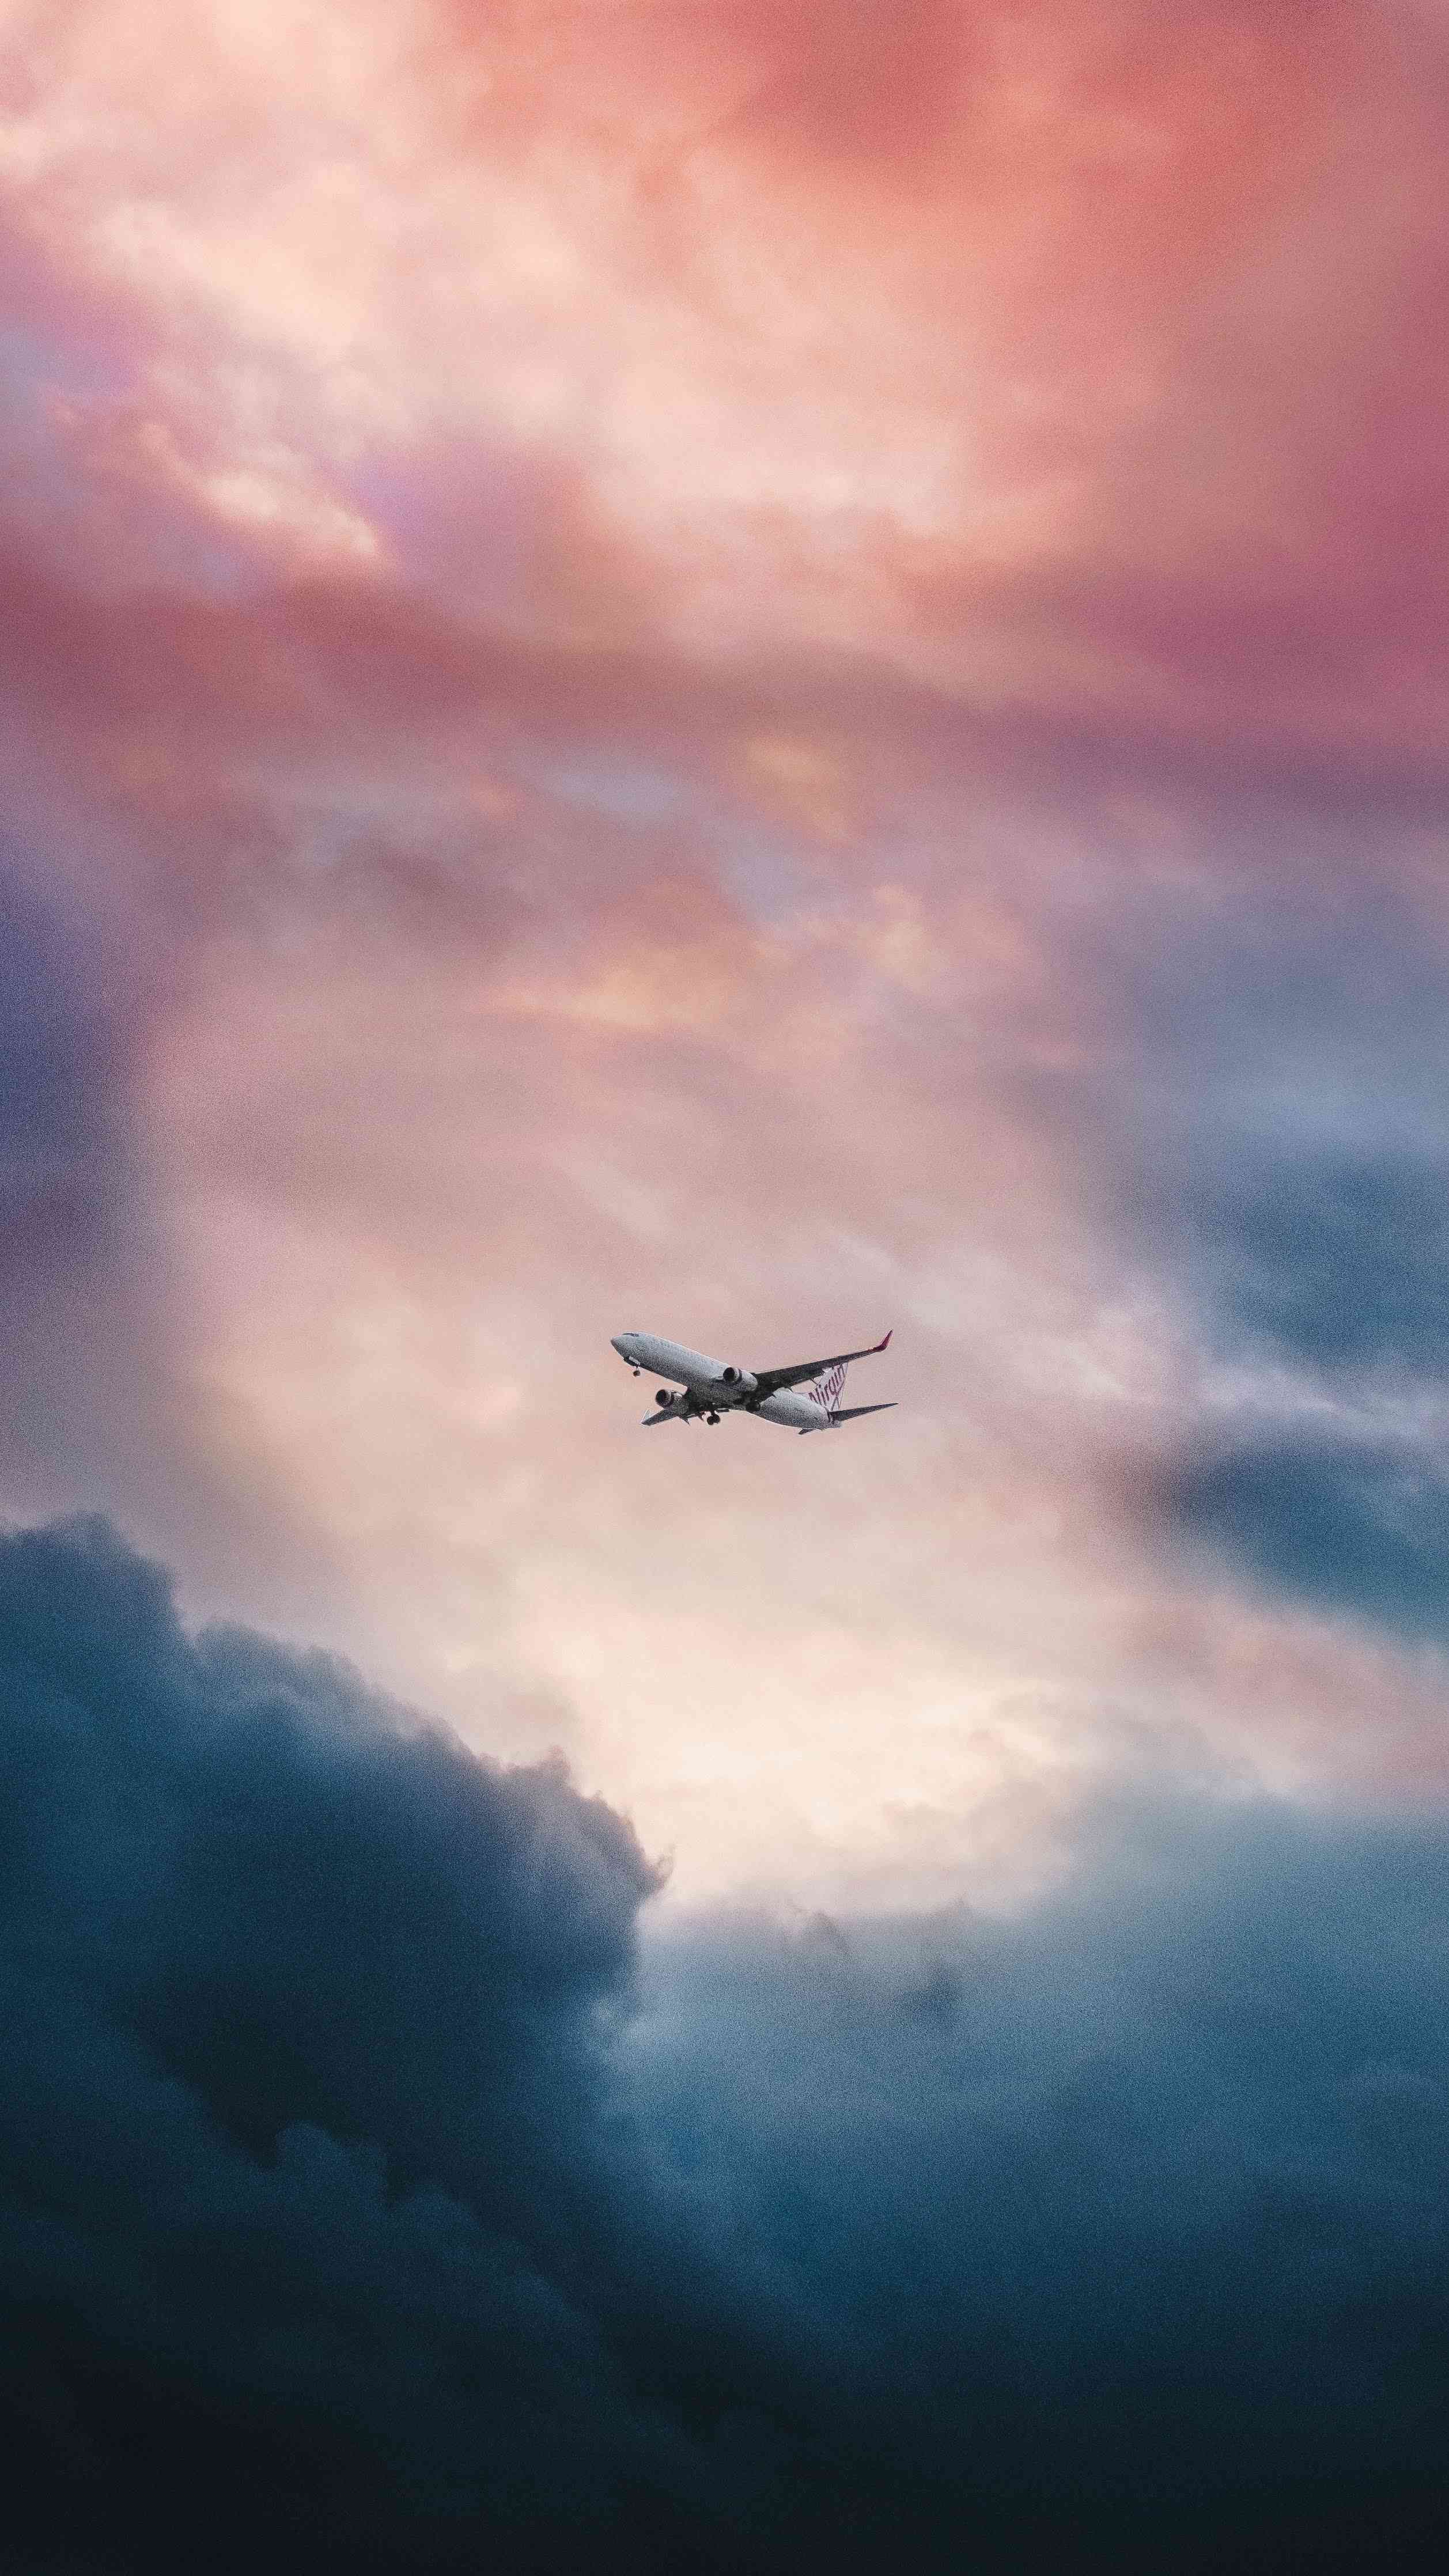 Plane in Sky HD iPhone Wallpaper. Travel picture, Best travel credit cards, Travel inspiration